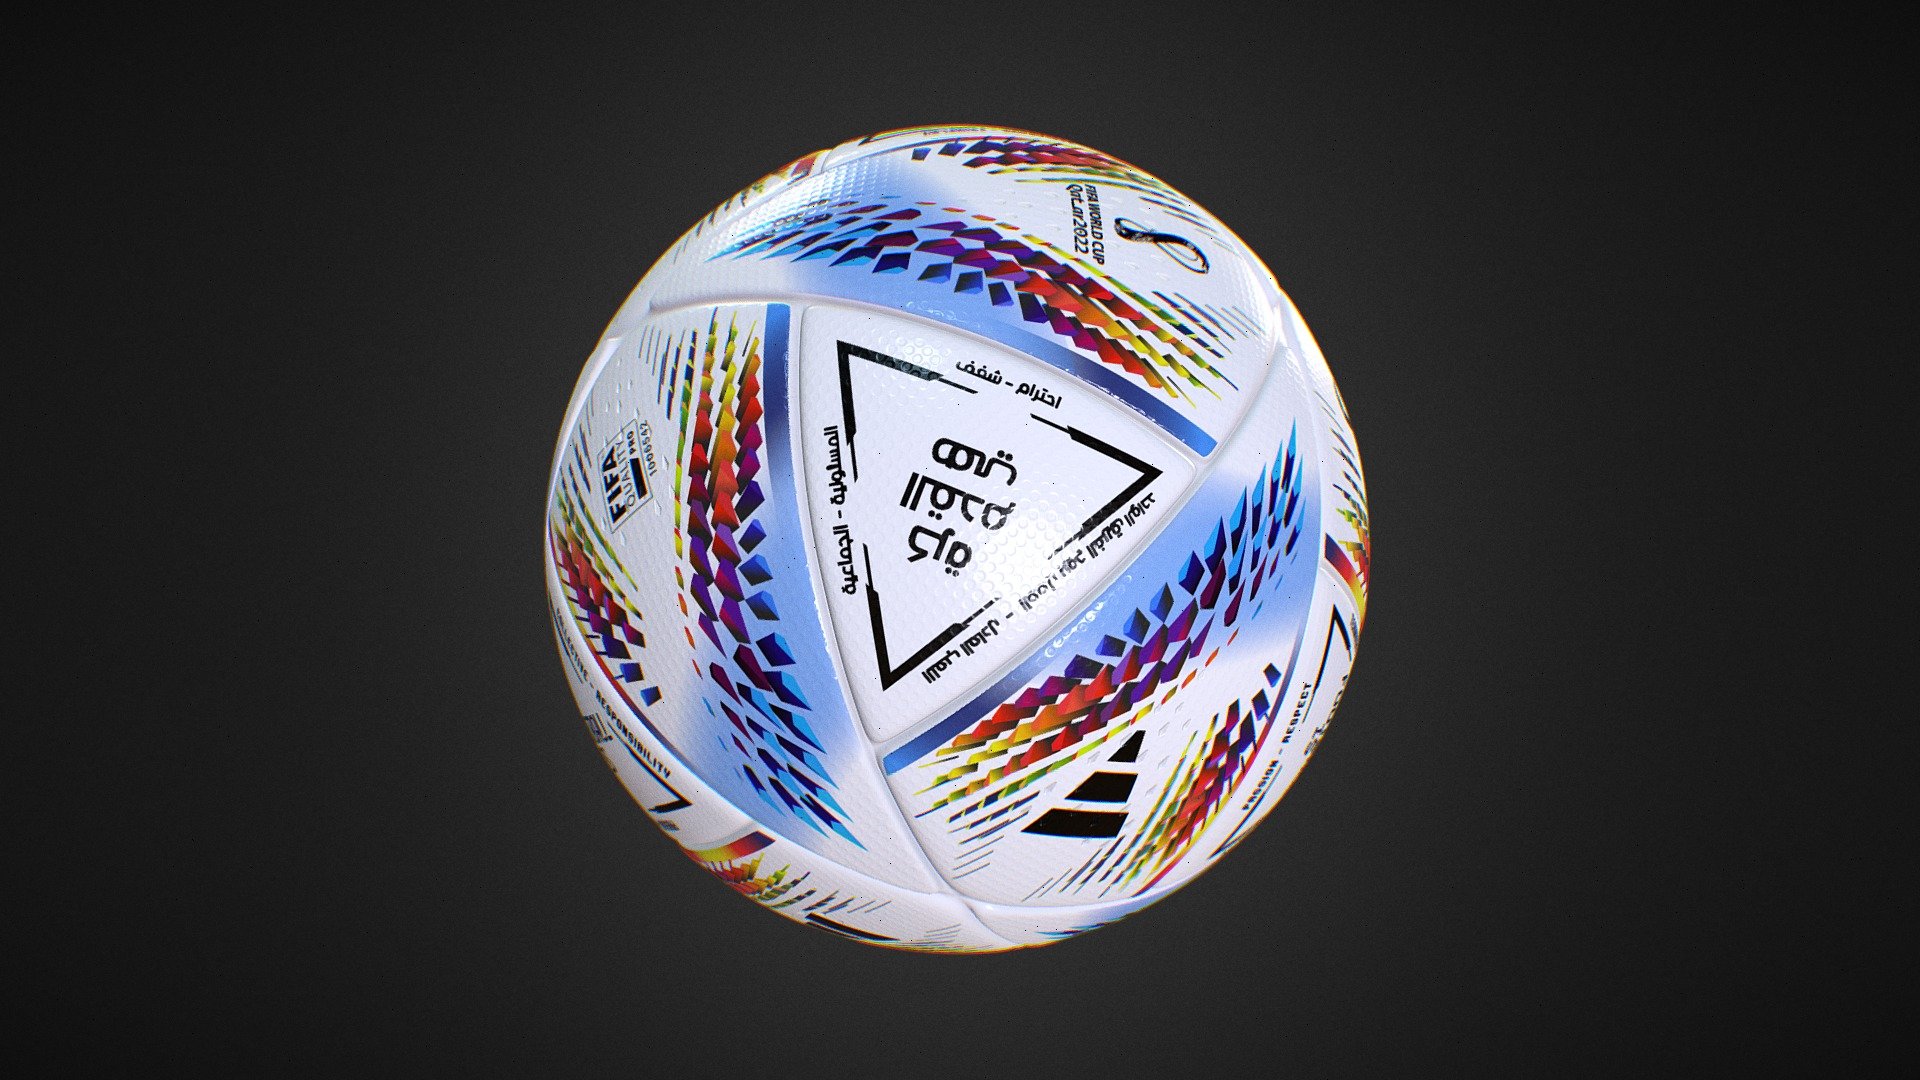 Download PNG Soccer ball, World Cup 2022 - Free Transparent PNG